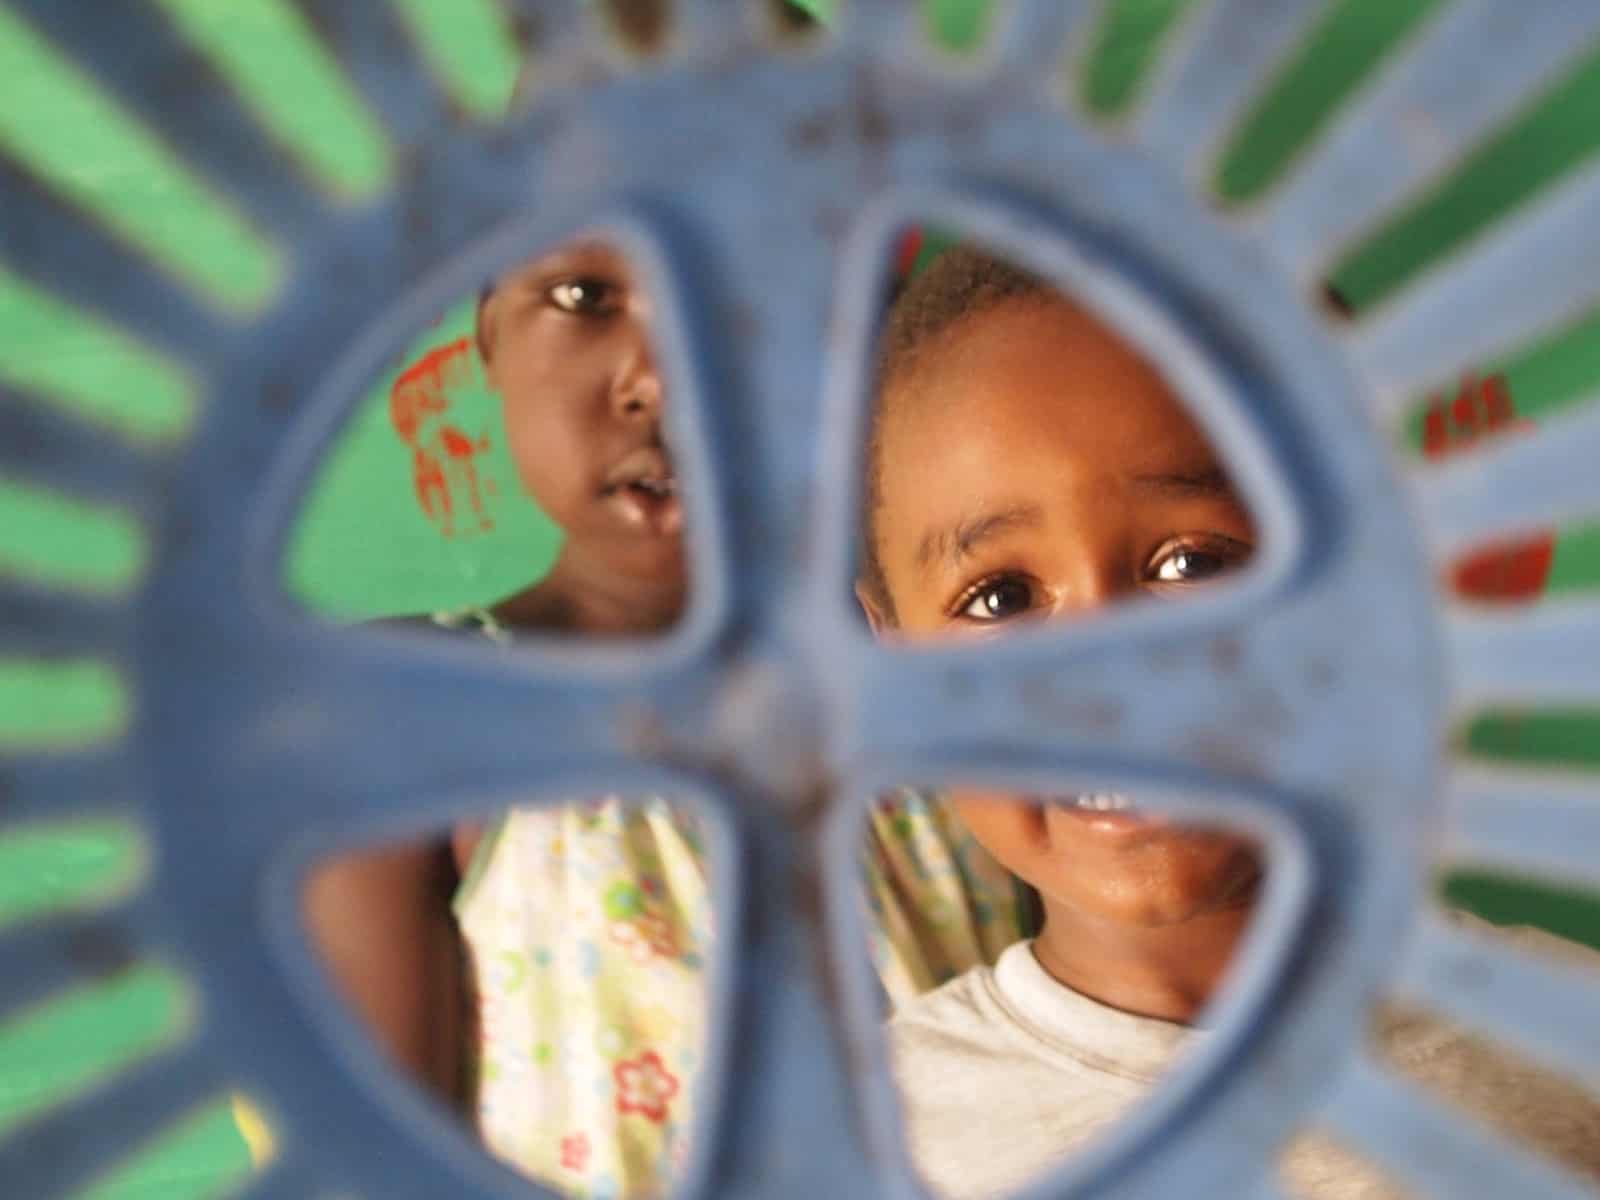 Two children look through a plastic structure.